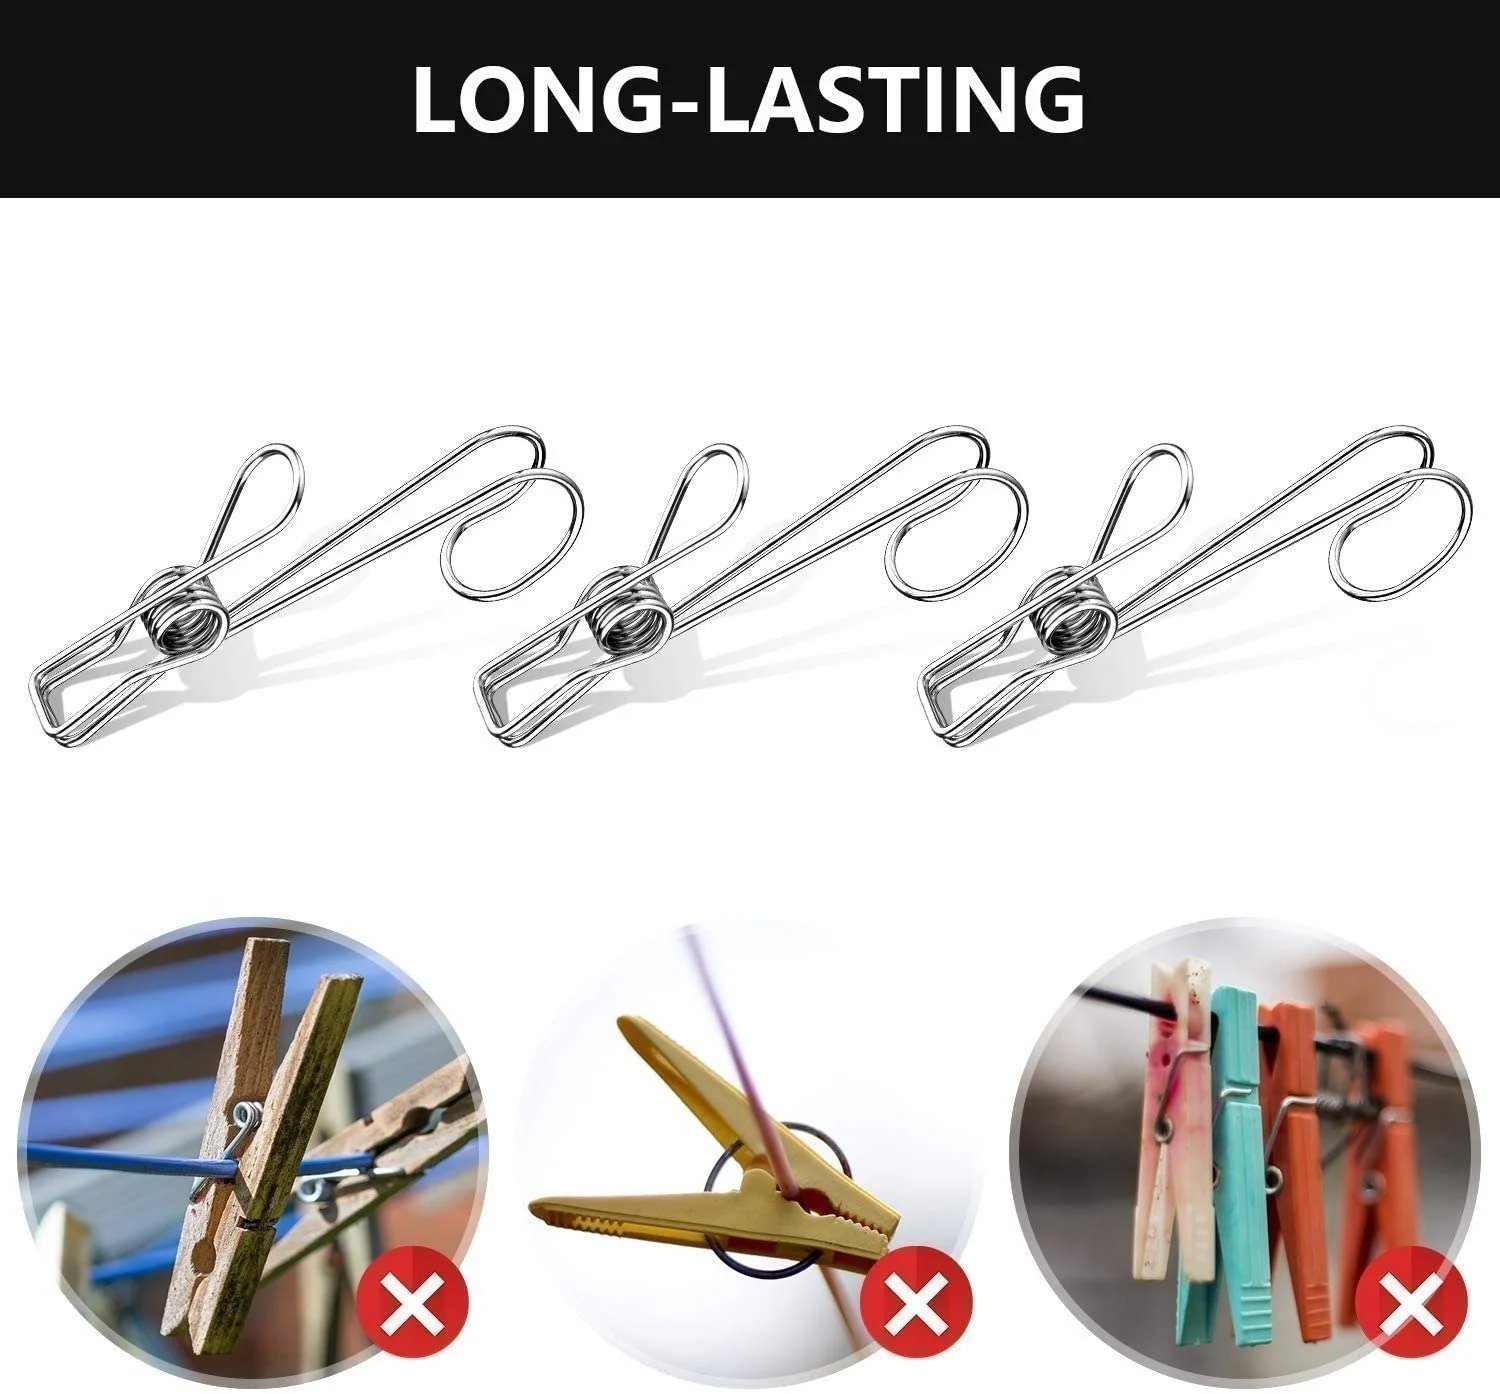 Early Summer Hot Sale 48% OFF - 304 Stainless Steel Metal Long Tail Clip(6 pcs/set)BUY 3 GET 1 FREE NOW